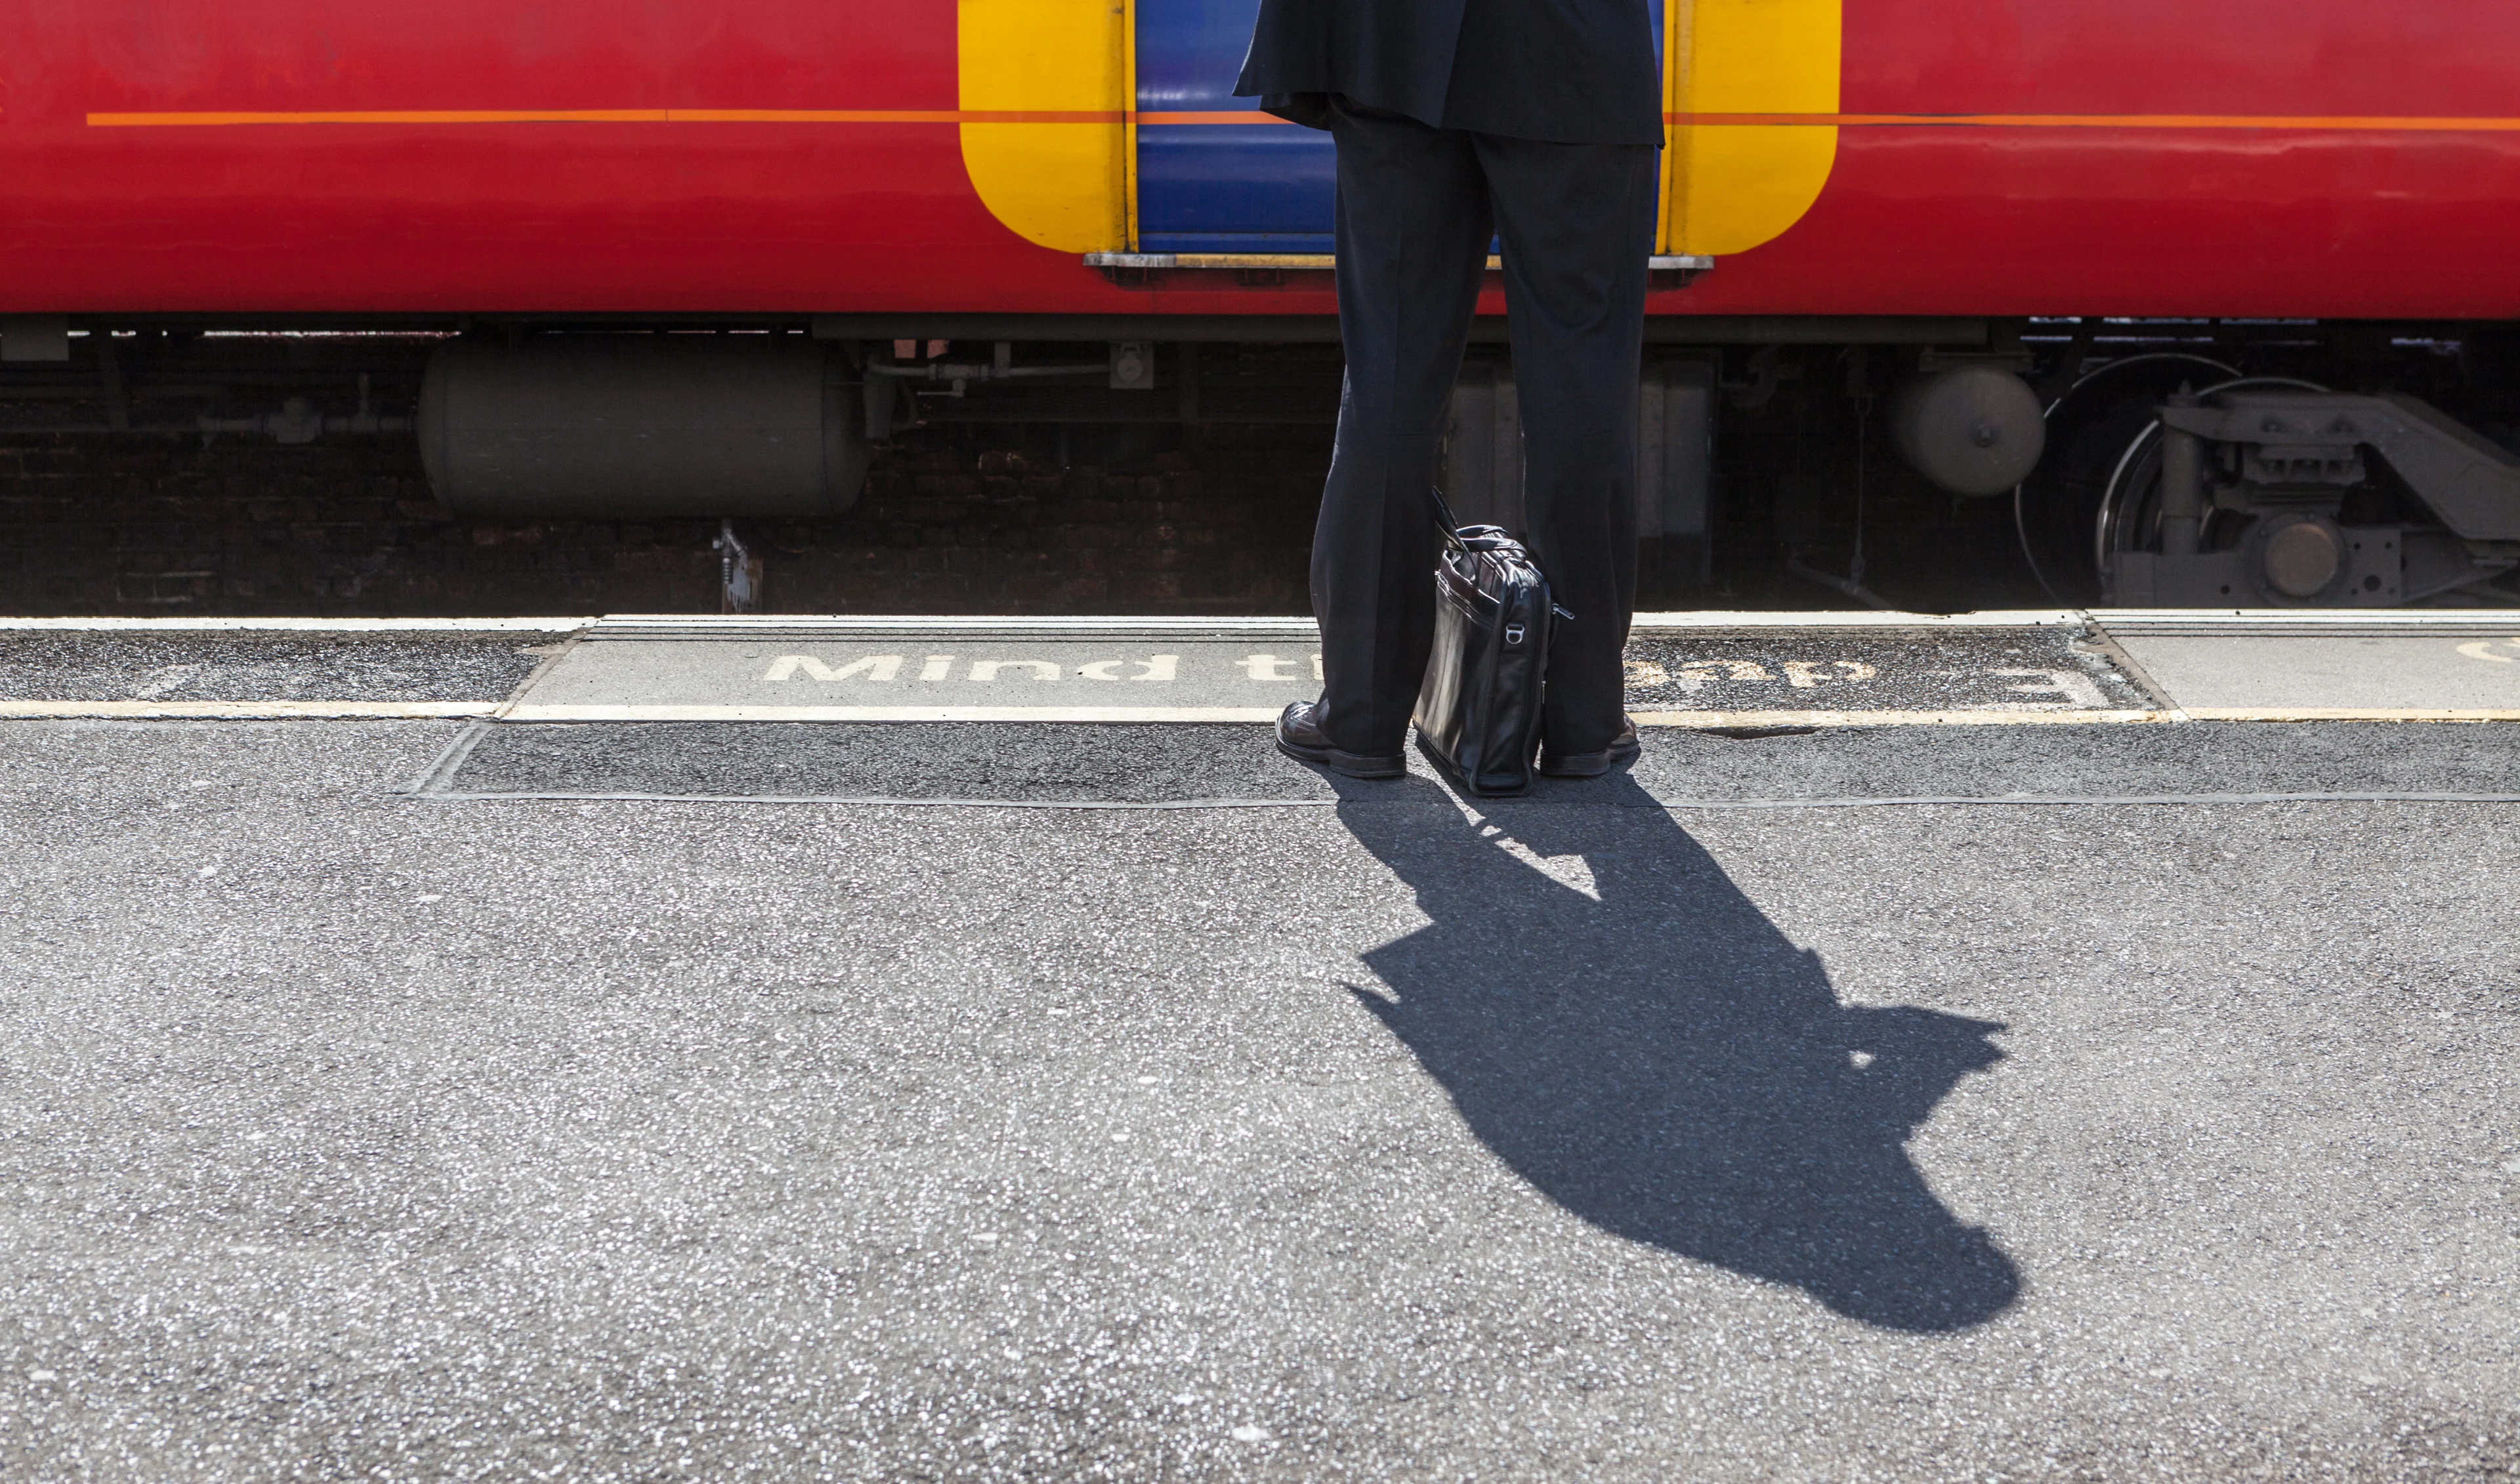 A man with a briefcase on the ground between his legs stands behind the yellow line on a station platform by the Mind The Gap signage on the floor